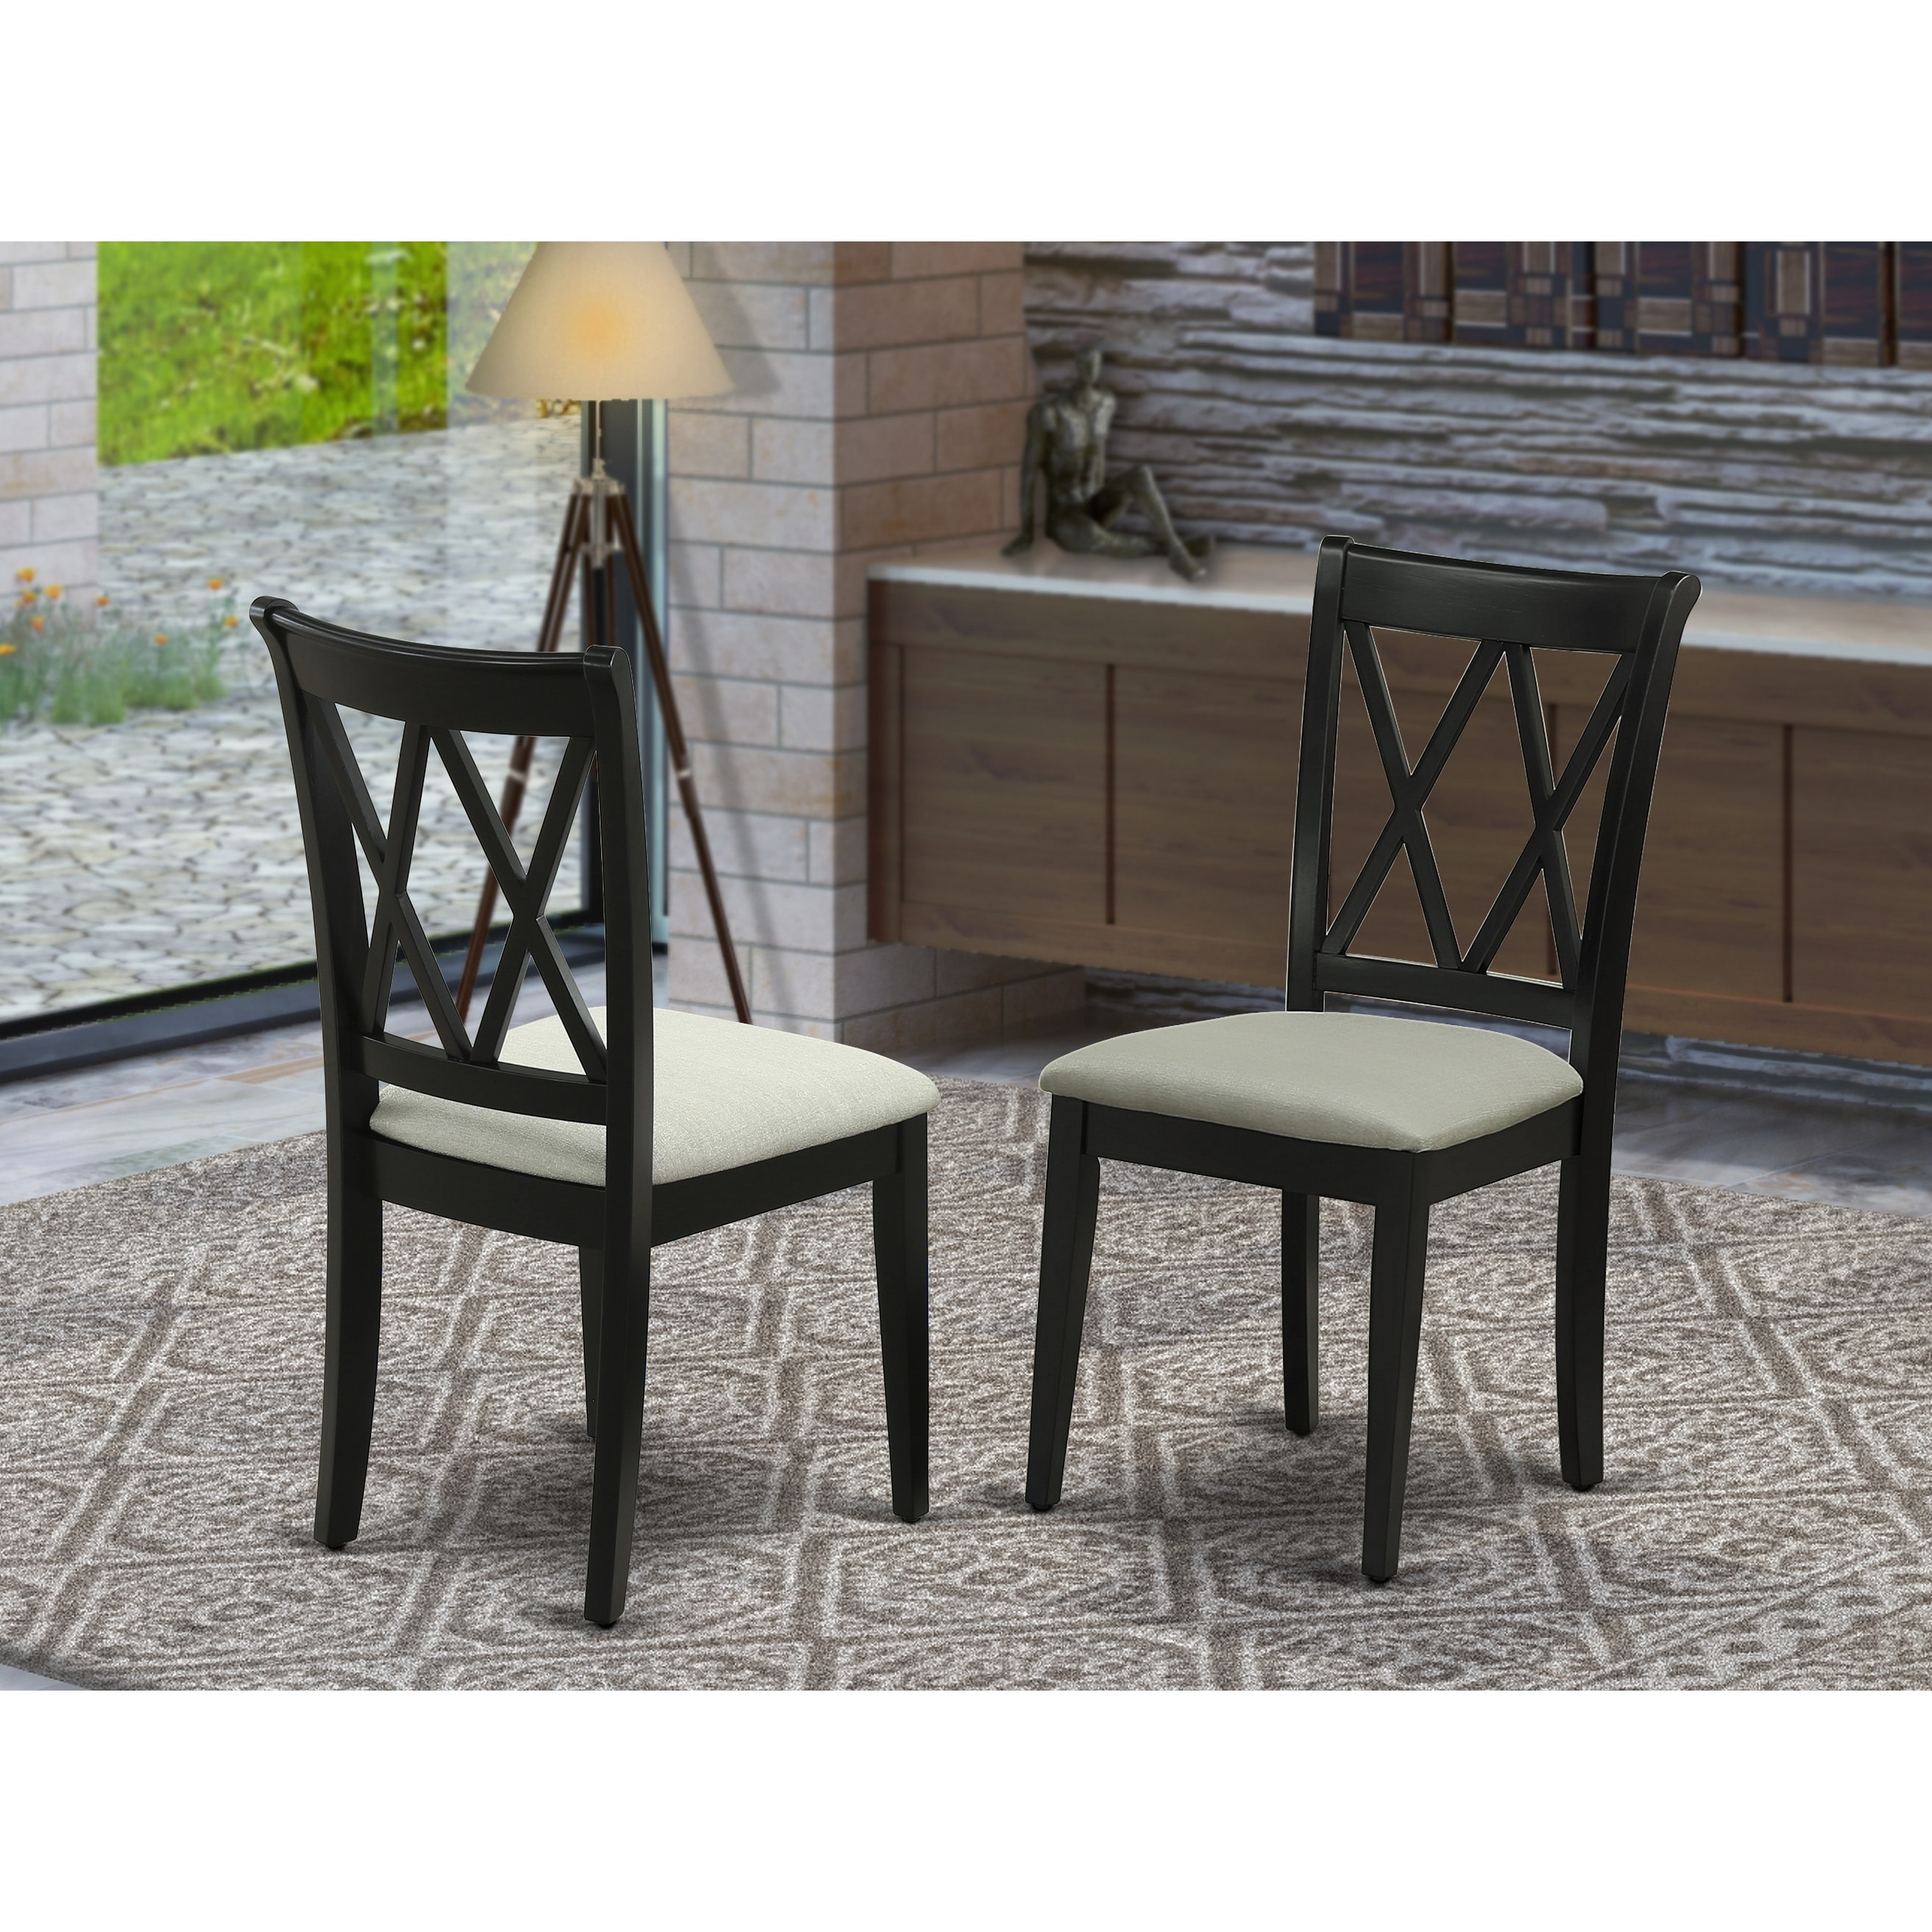 clarksville black double xback chairs with linen fabric set of 2